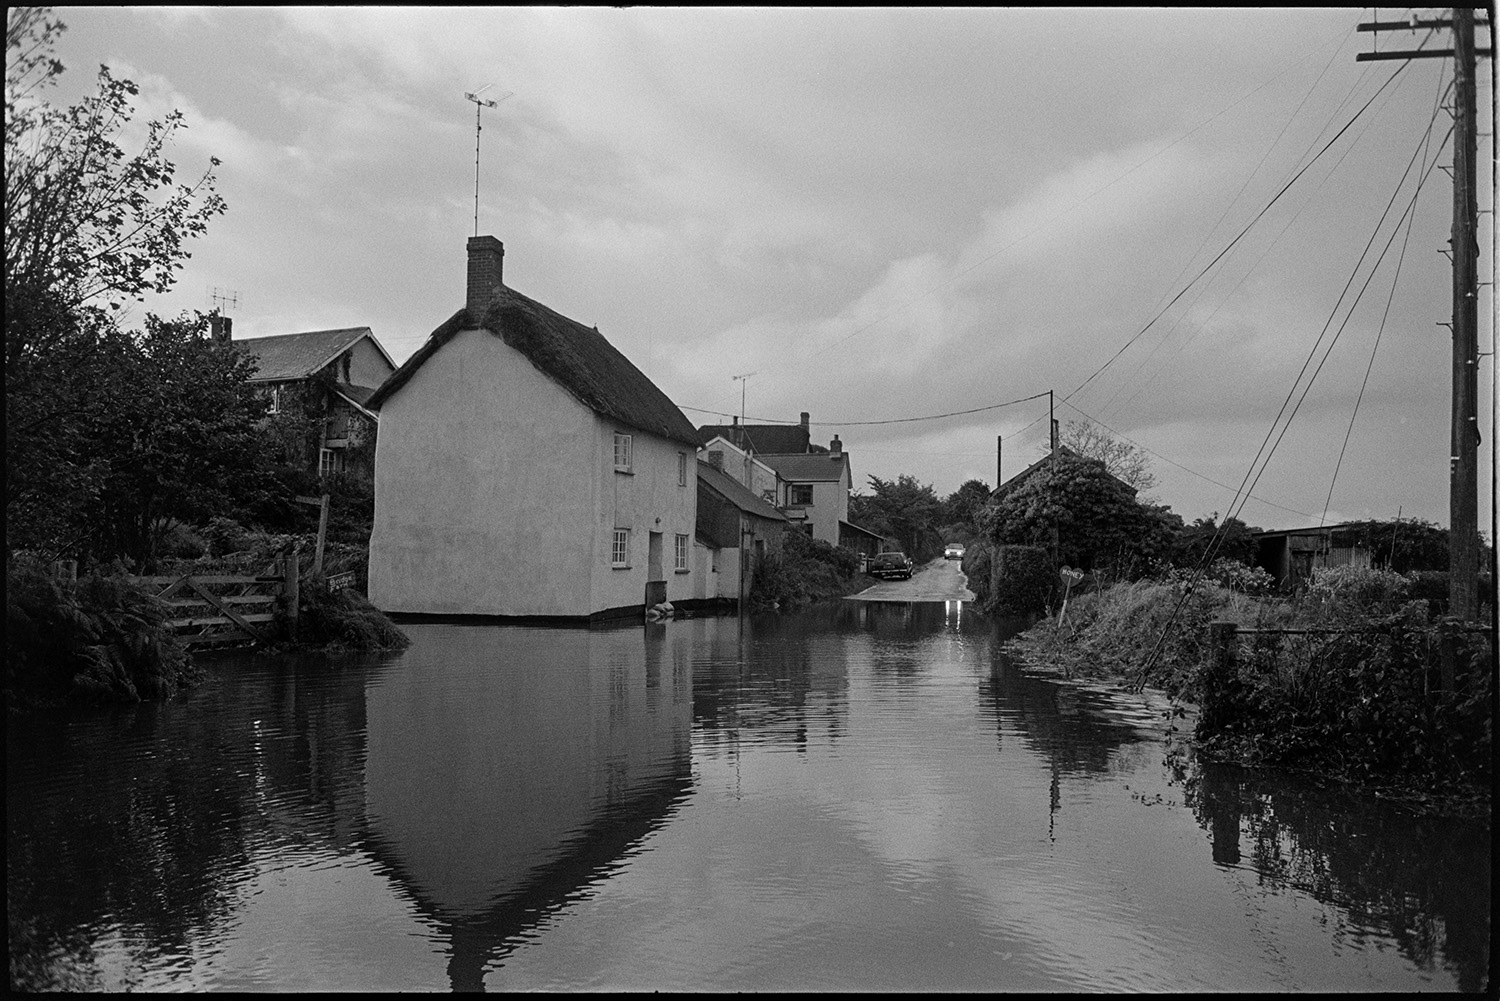 River in flood, marooned thatched cottage, iron gate in flooded field. 
[A thatched cottage and road cut off by flooding from the River Taw at Bridge Reeve, Ashreigney. Sand bags can be seen outside the cottage doorway.]